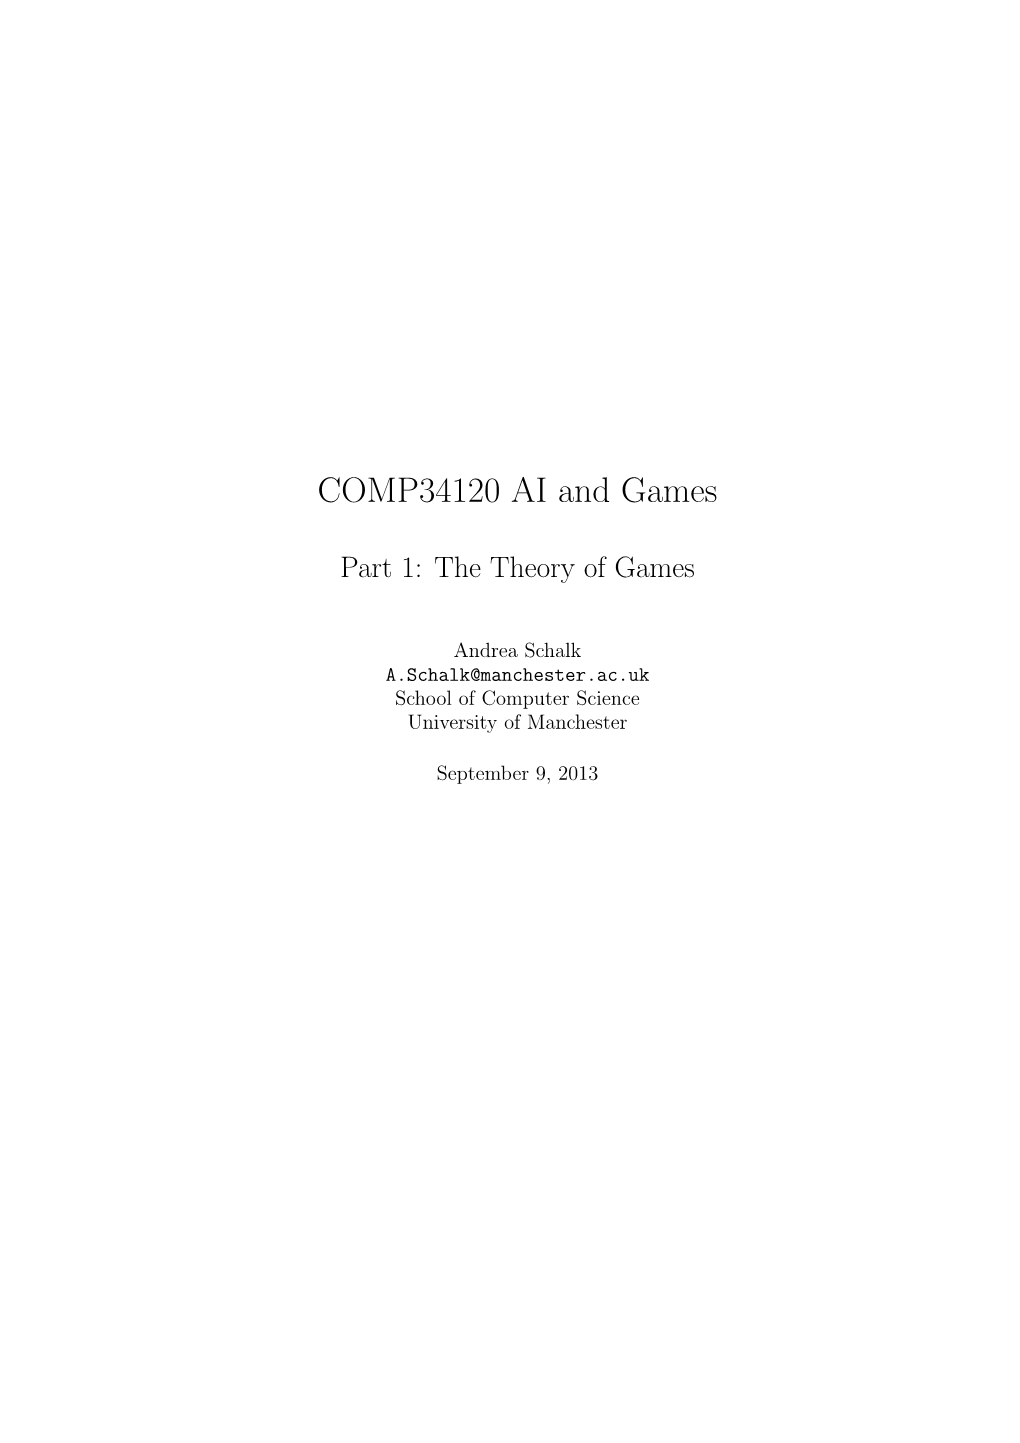 COMP34120 AI and Games